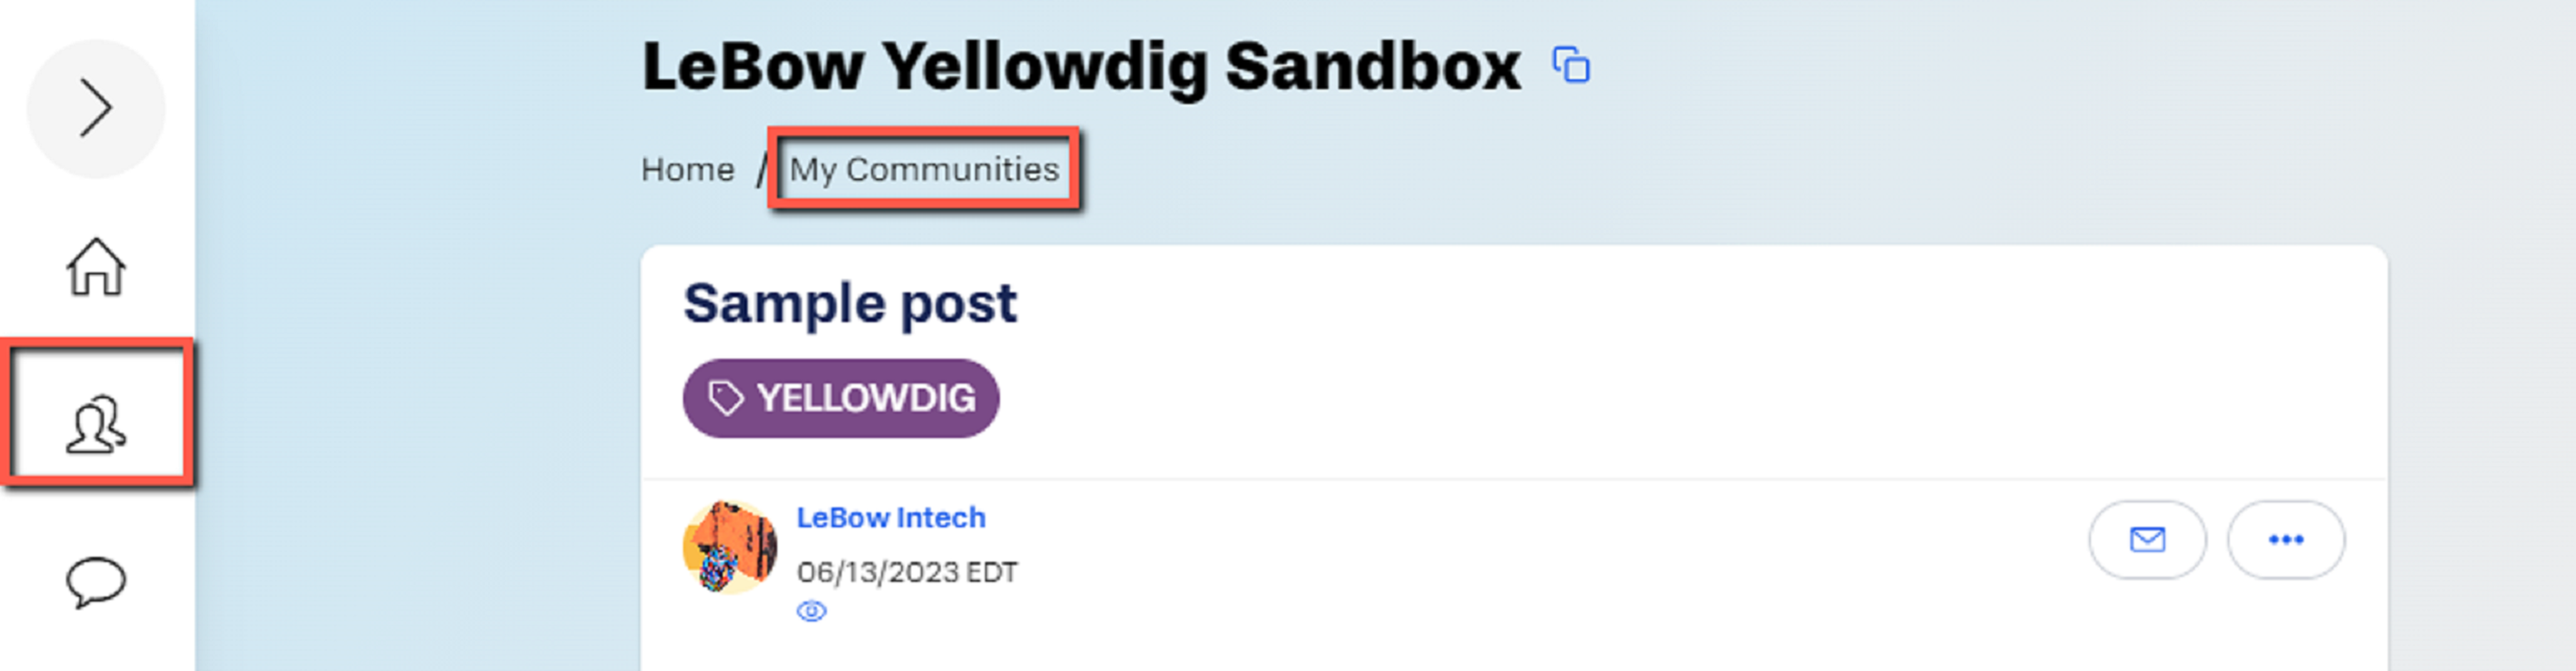 Screenshot from Yellowdig feed, pointing out the Communities icon on the lefthand navigation menu, as well as the "My Communities" text link that appears right below the page title